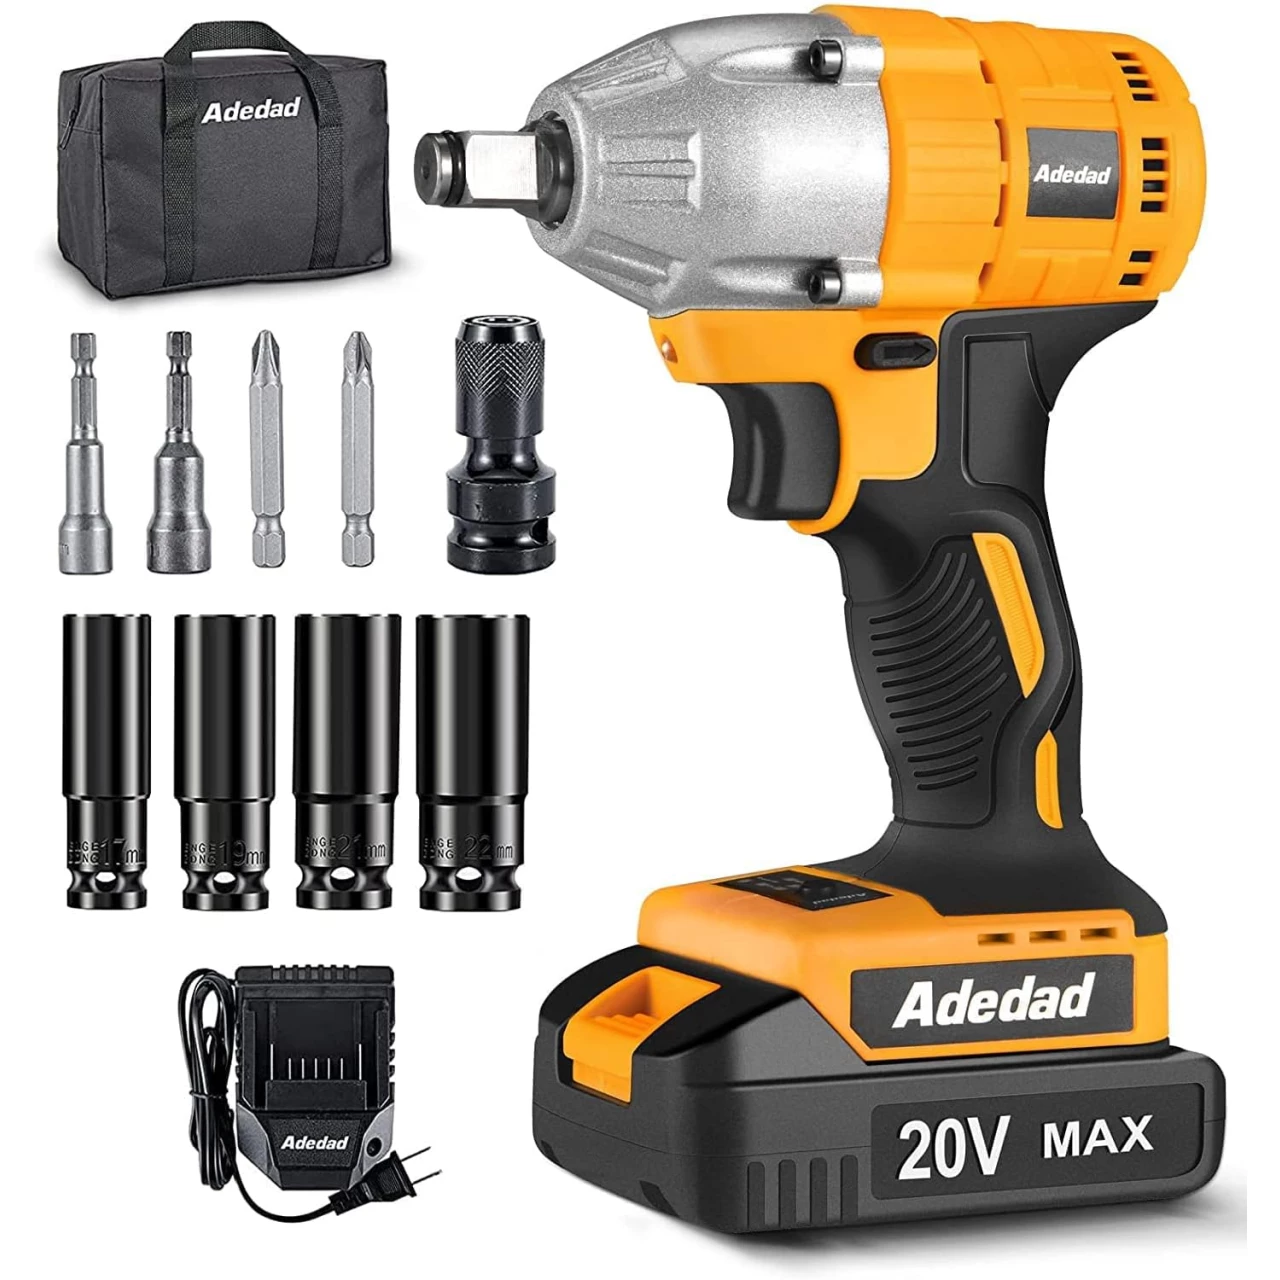 Adedad Cordless Impact Wrench 1/2 inch, 20V Brushless Impact Gun with Battery and Charger, High Torque 300 ft-lbs 3000 RPM Impact Wrench with 1-Hour Fast Charger, Led Light